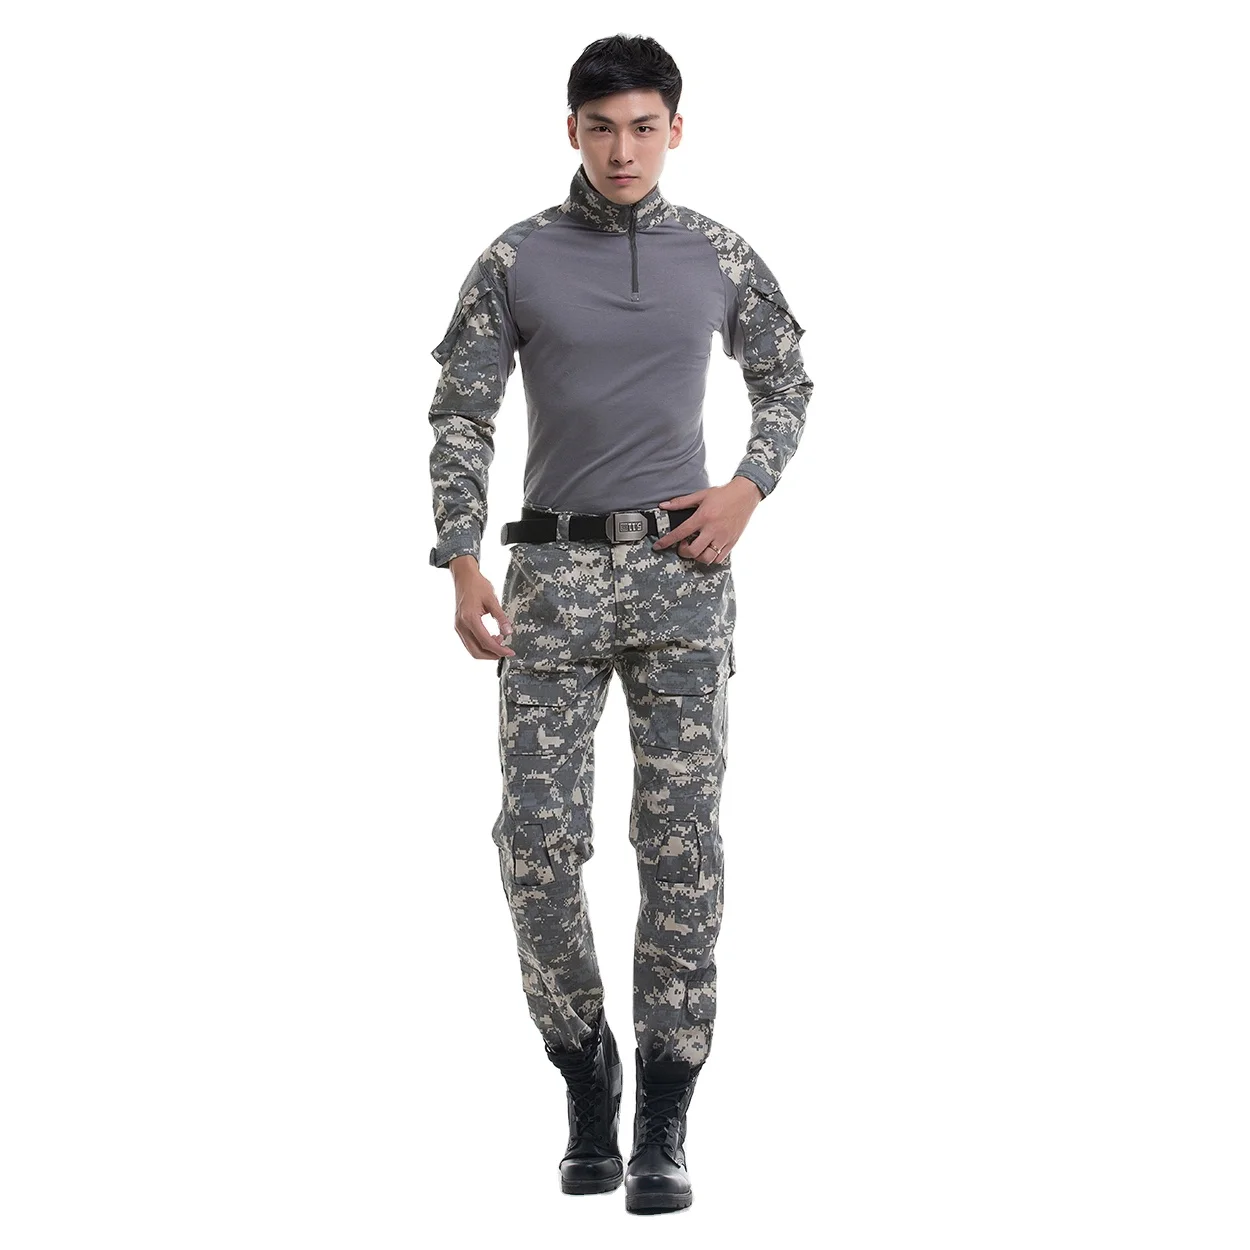 

Mens Track Sets Camouflage Hunting Suit For Men Military Suit American Combat Clothing Frog Suit military t-shirt camouflage, Black cb acu ocp etc / accept customized color